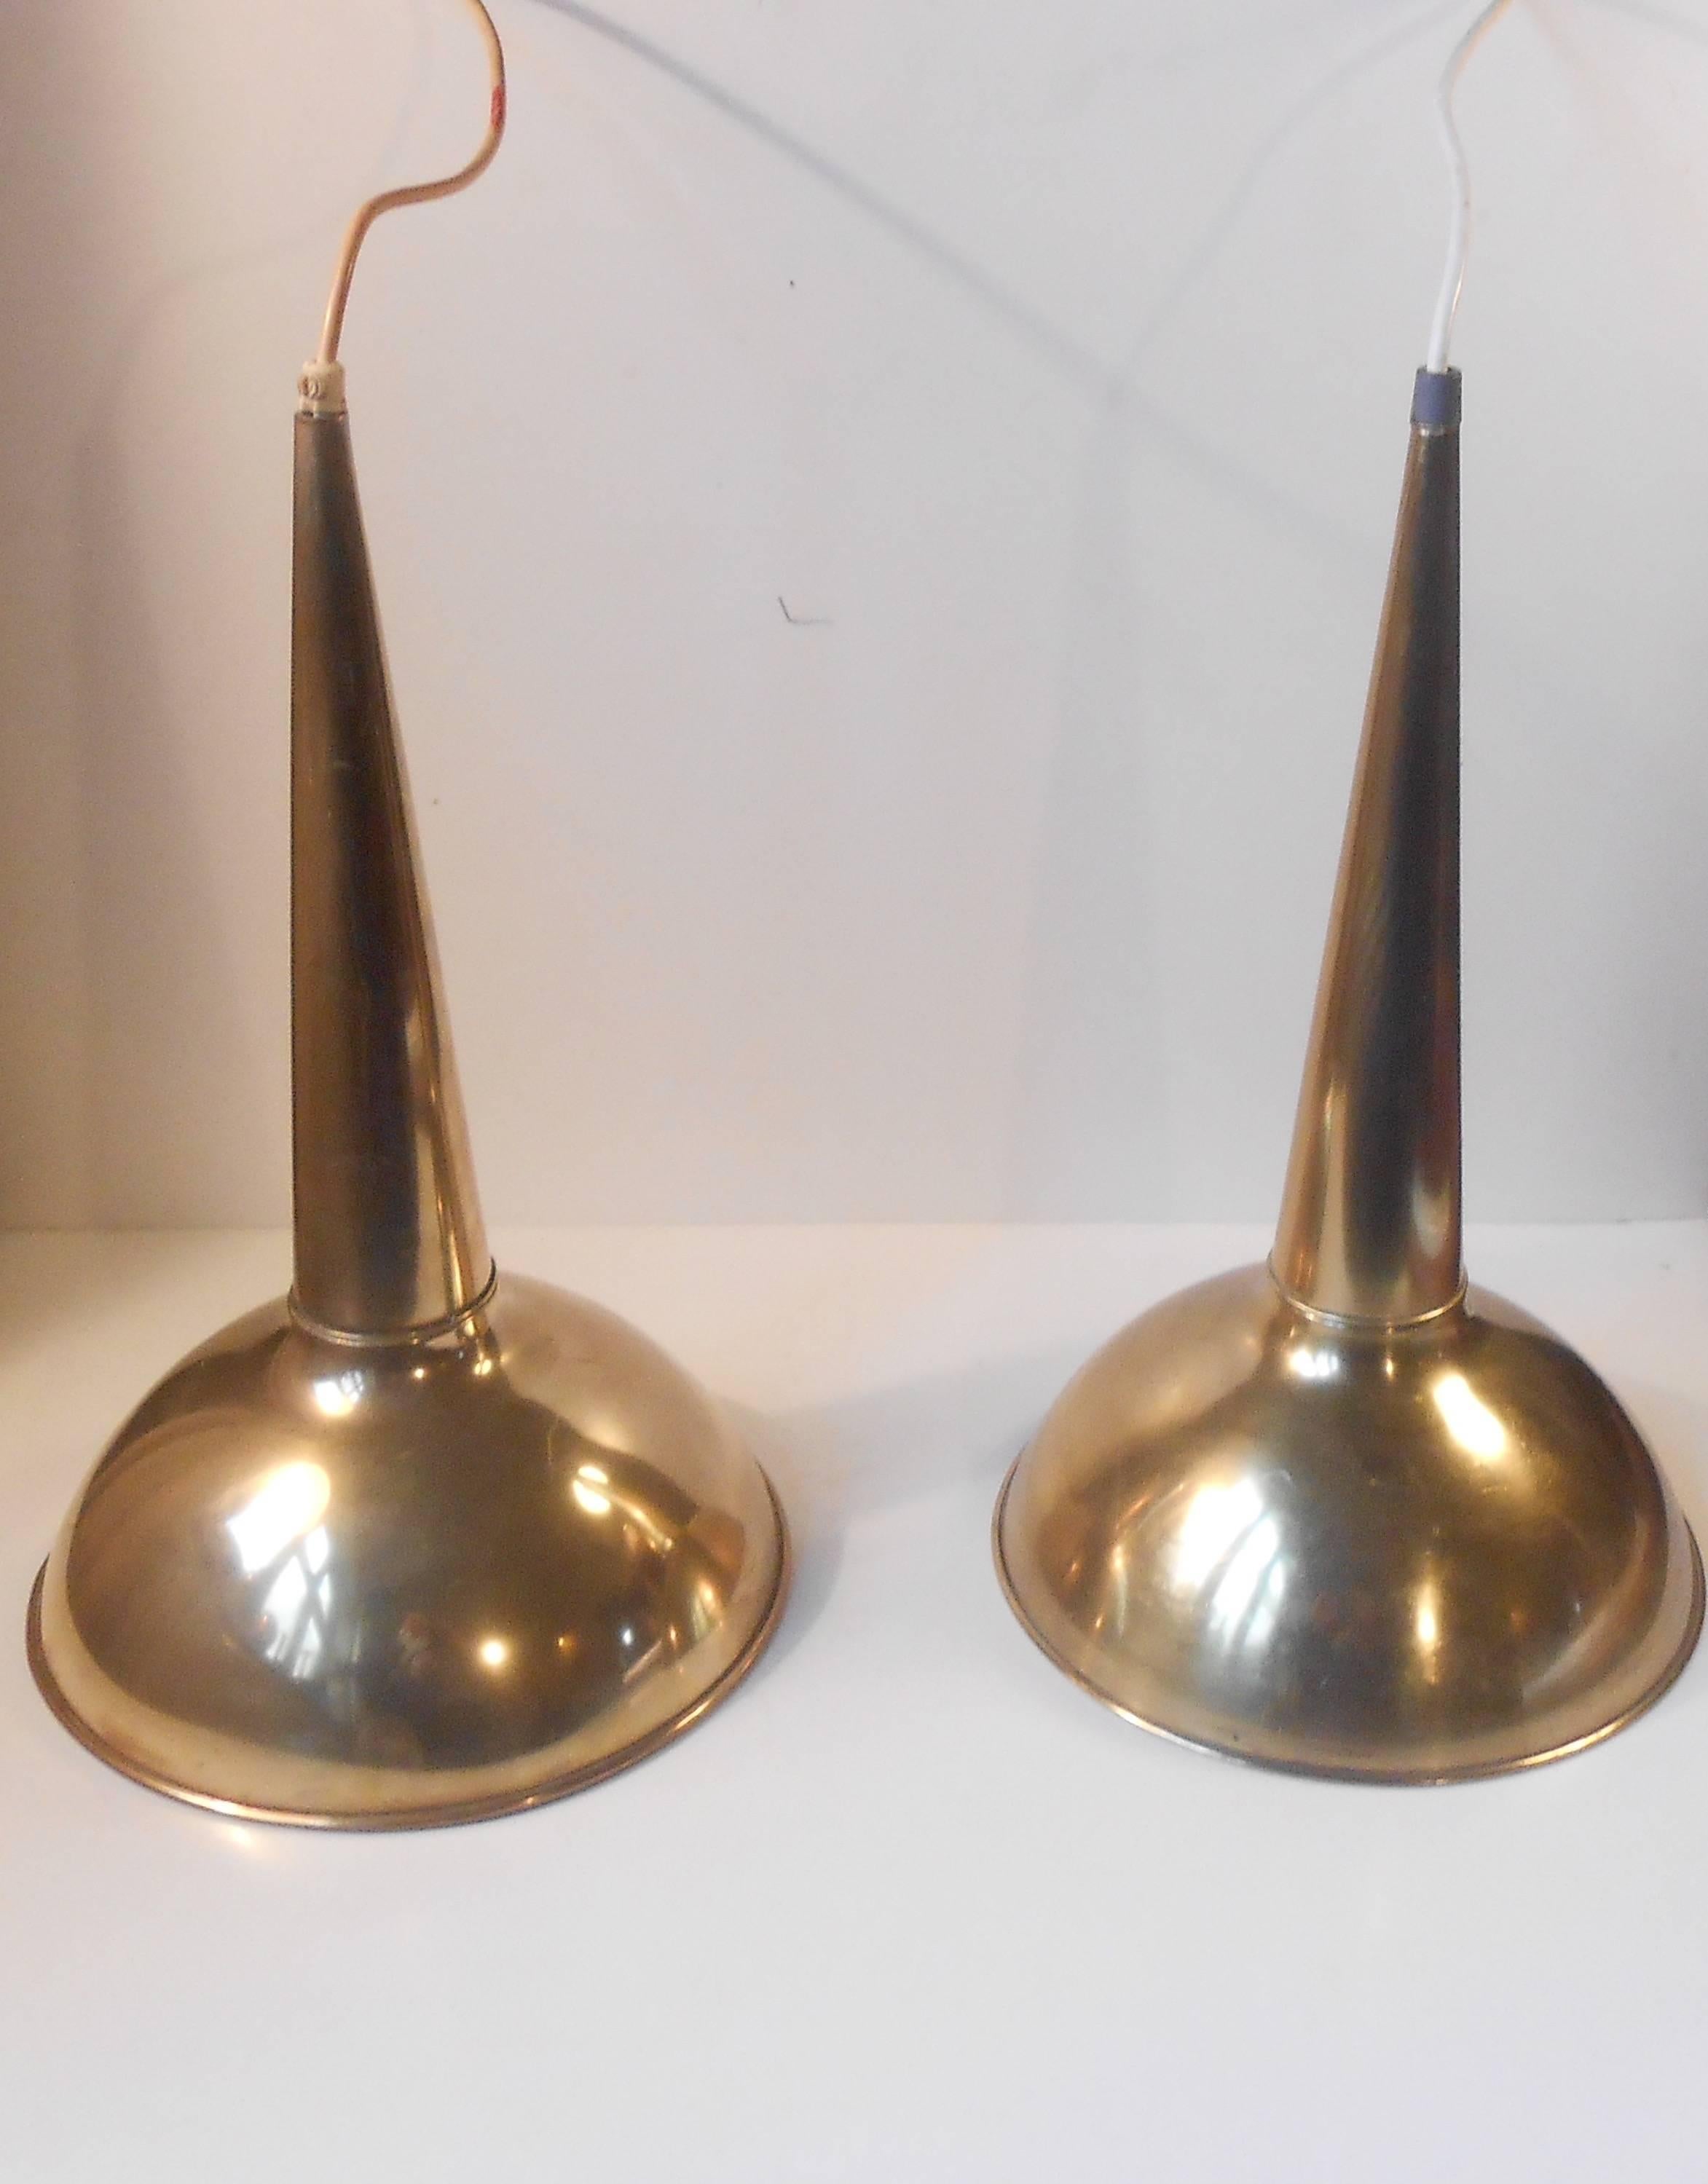 A rare pair of trumpet-shaped pendant lights by anonymous Scandinavian maker/designer, circa 1960. Composed of solid polished brass these lights demands attention. Measurements: D 10 inches (25 cm), H 17 inches (43 cm). They will be shipped in